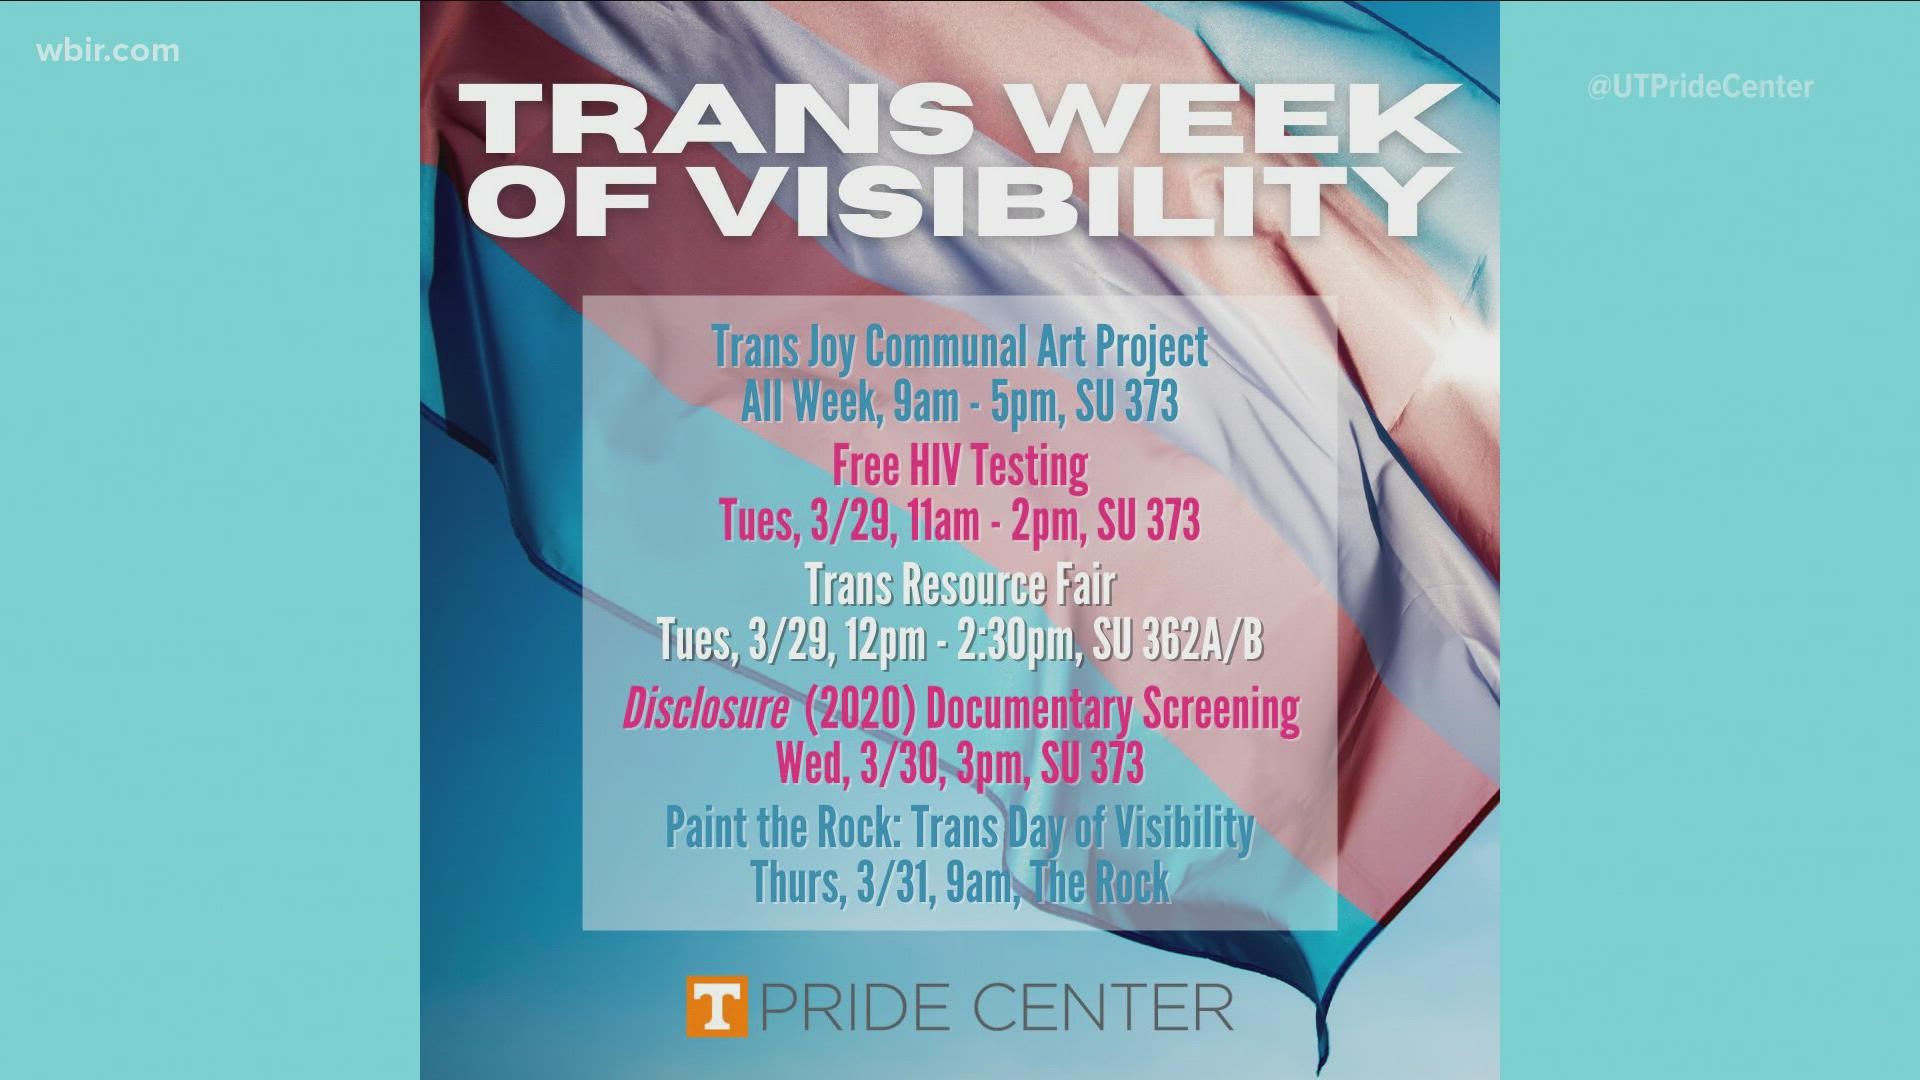 UT is celebrating Trans Week of Visibility with a full week of learning.